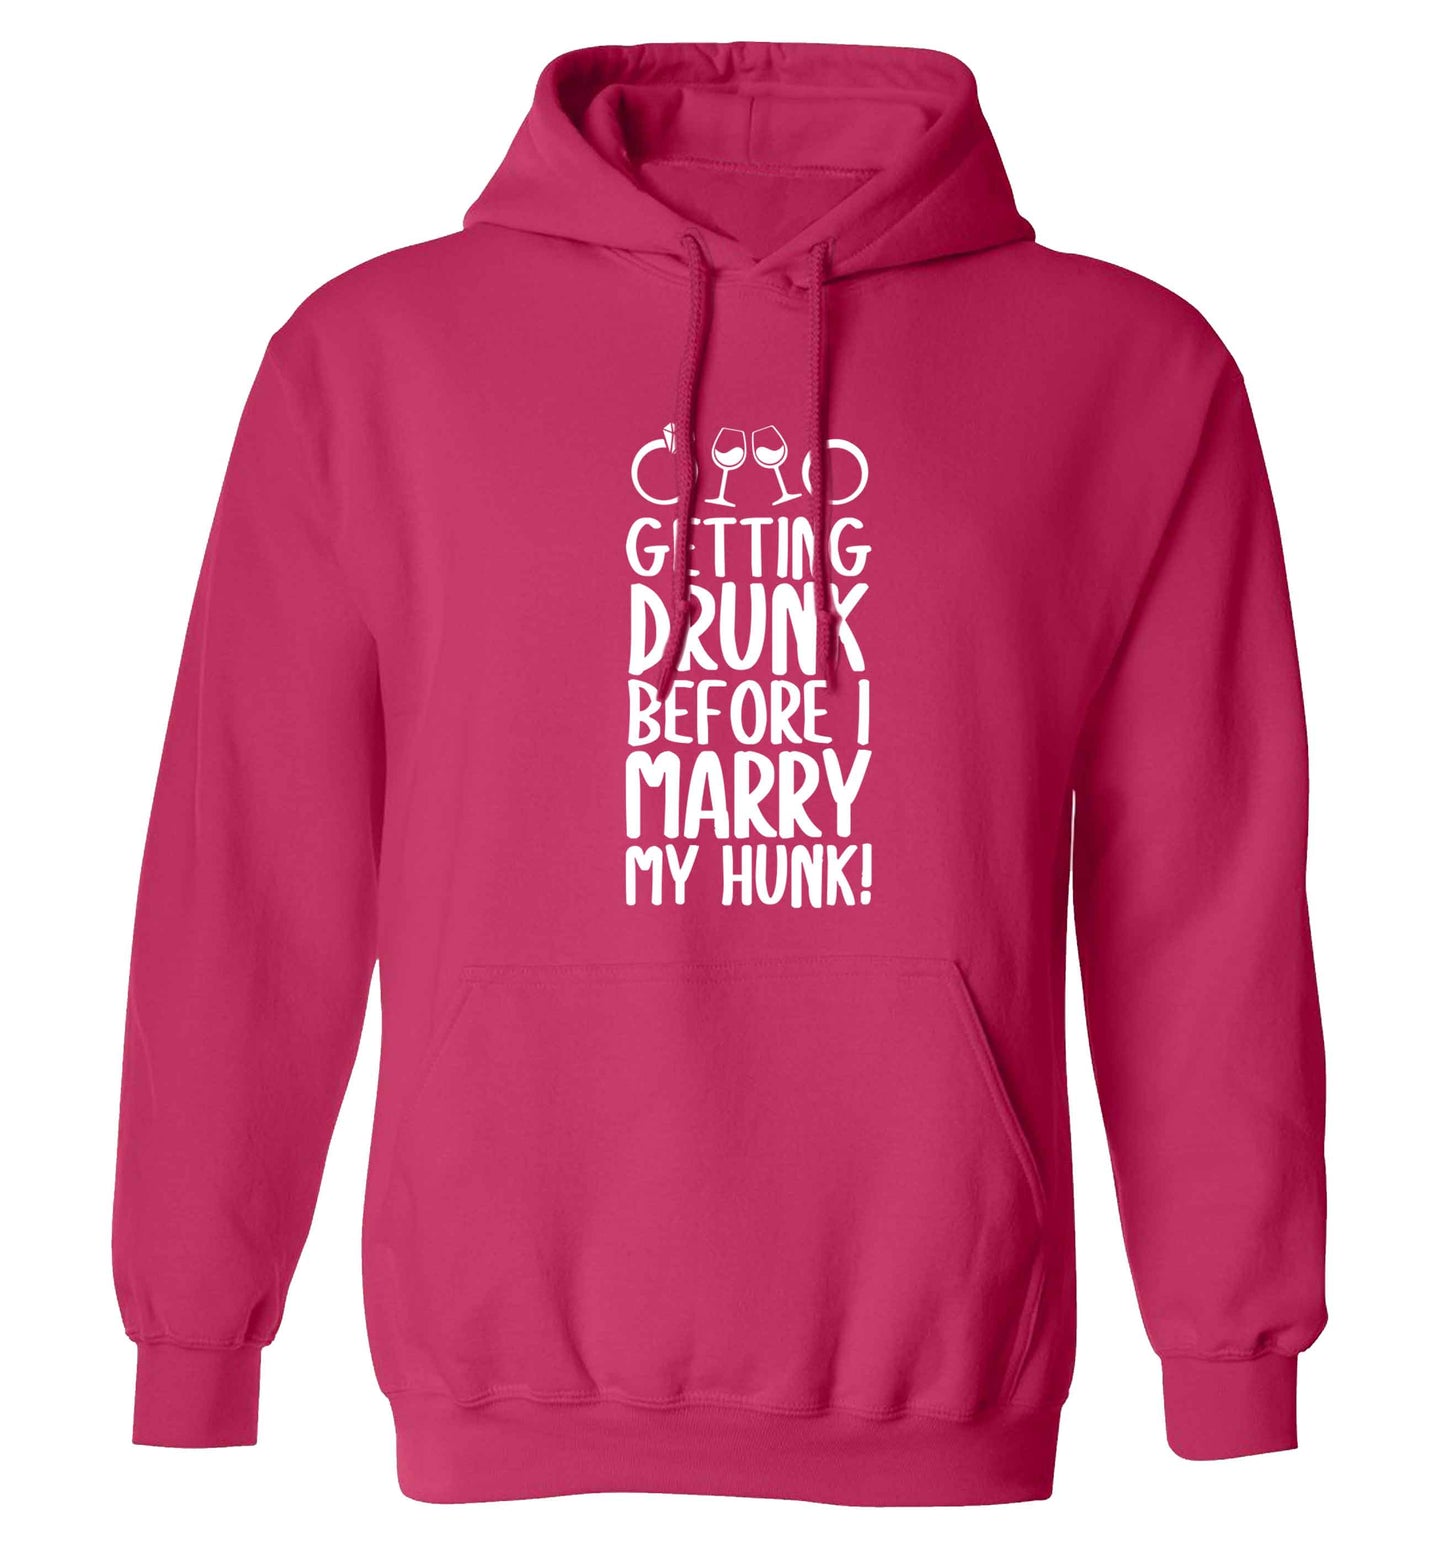 Getting drunk before I marry my hunk adults unisex pink hoodie 2XL